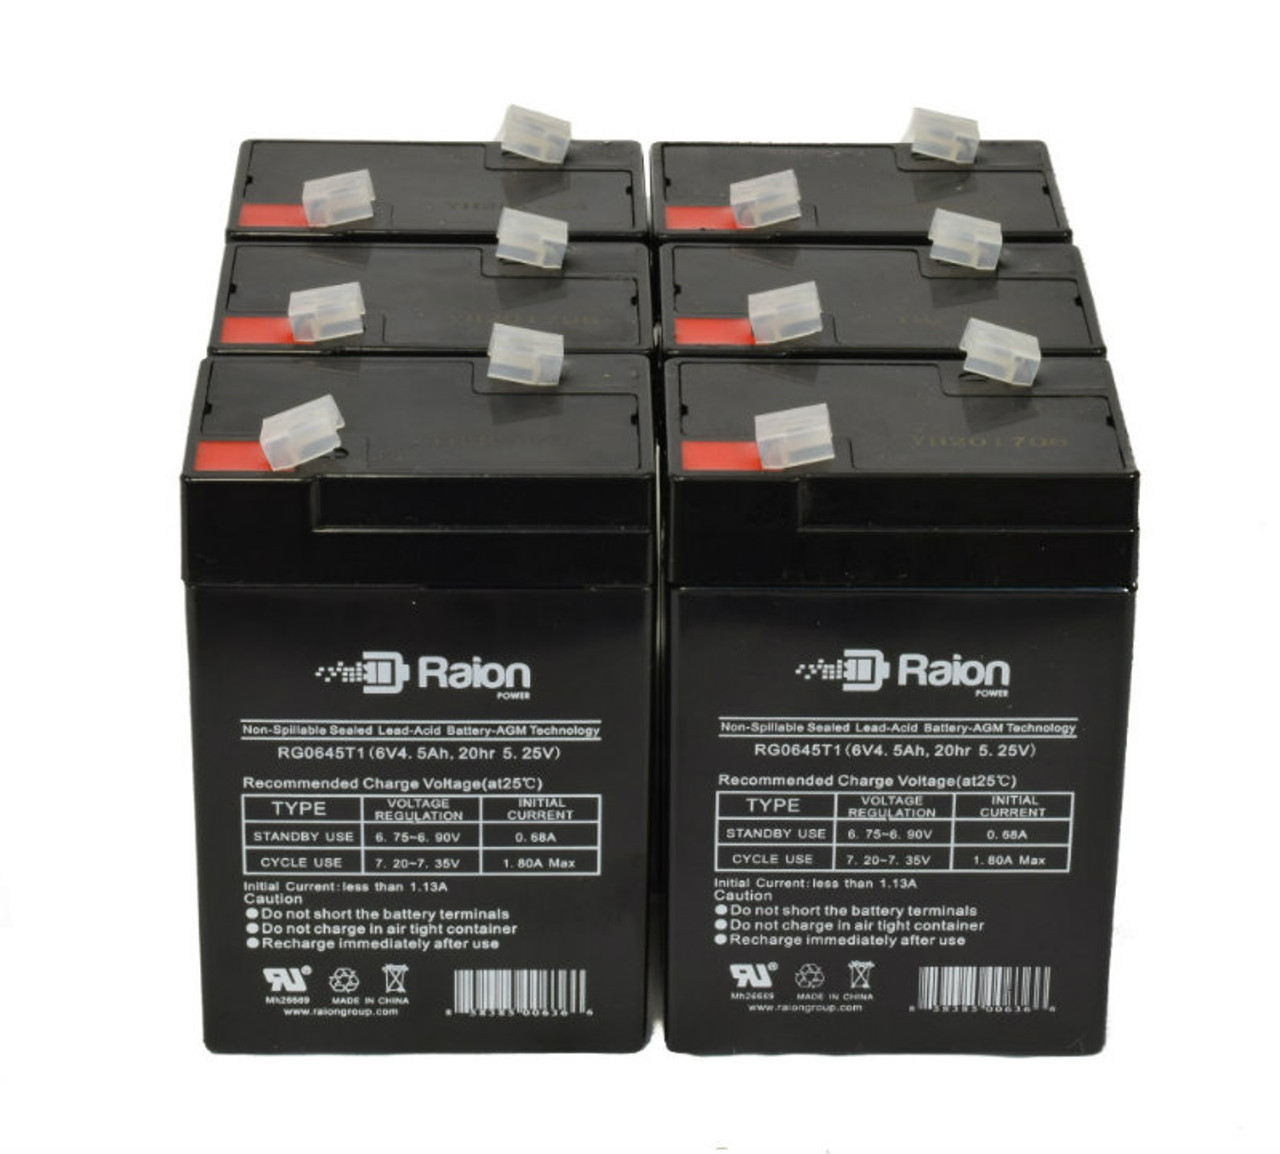 Raion Power 6 Volt 4.5Ah RG0645T1 Replacement Battery for Blossom BT5-6A - 6 Pack